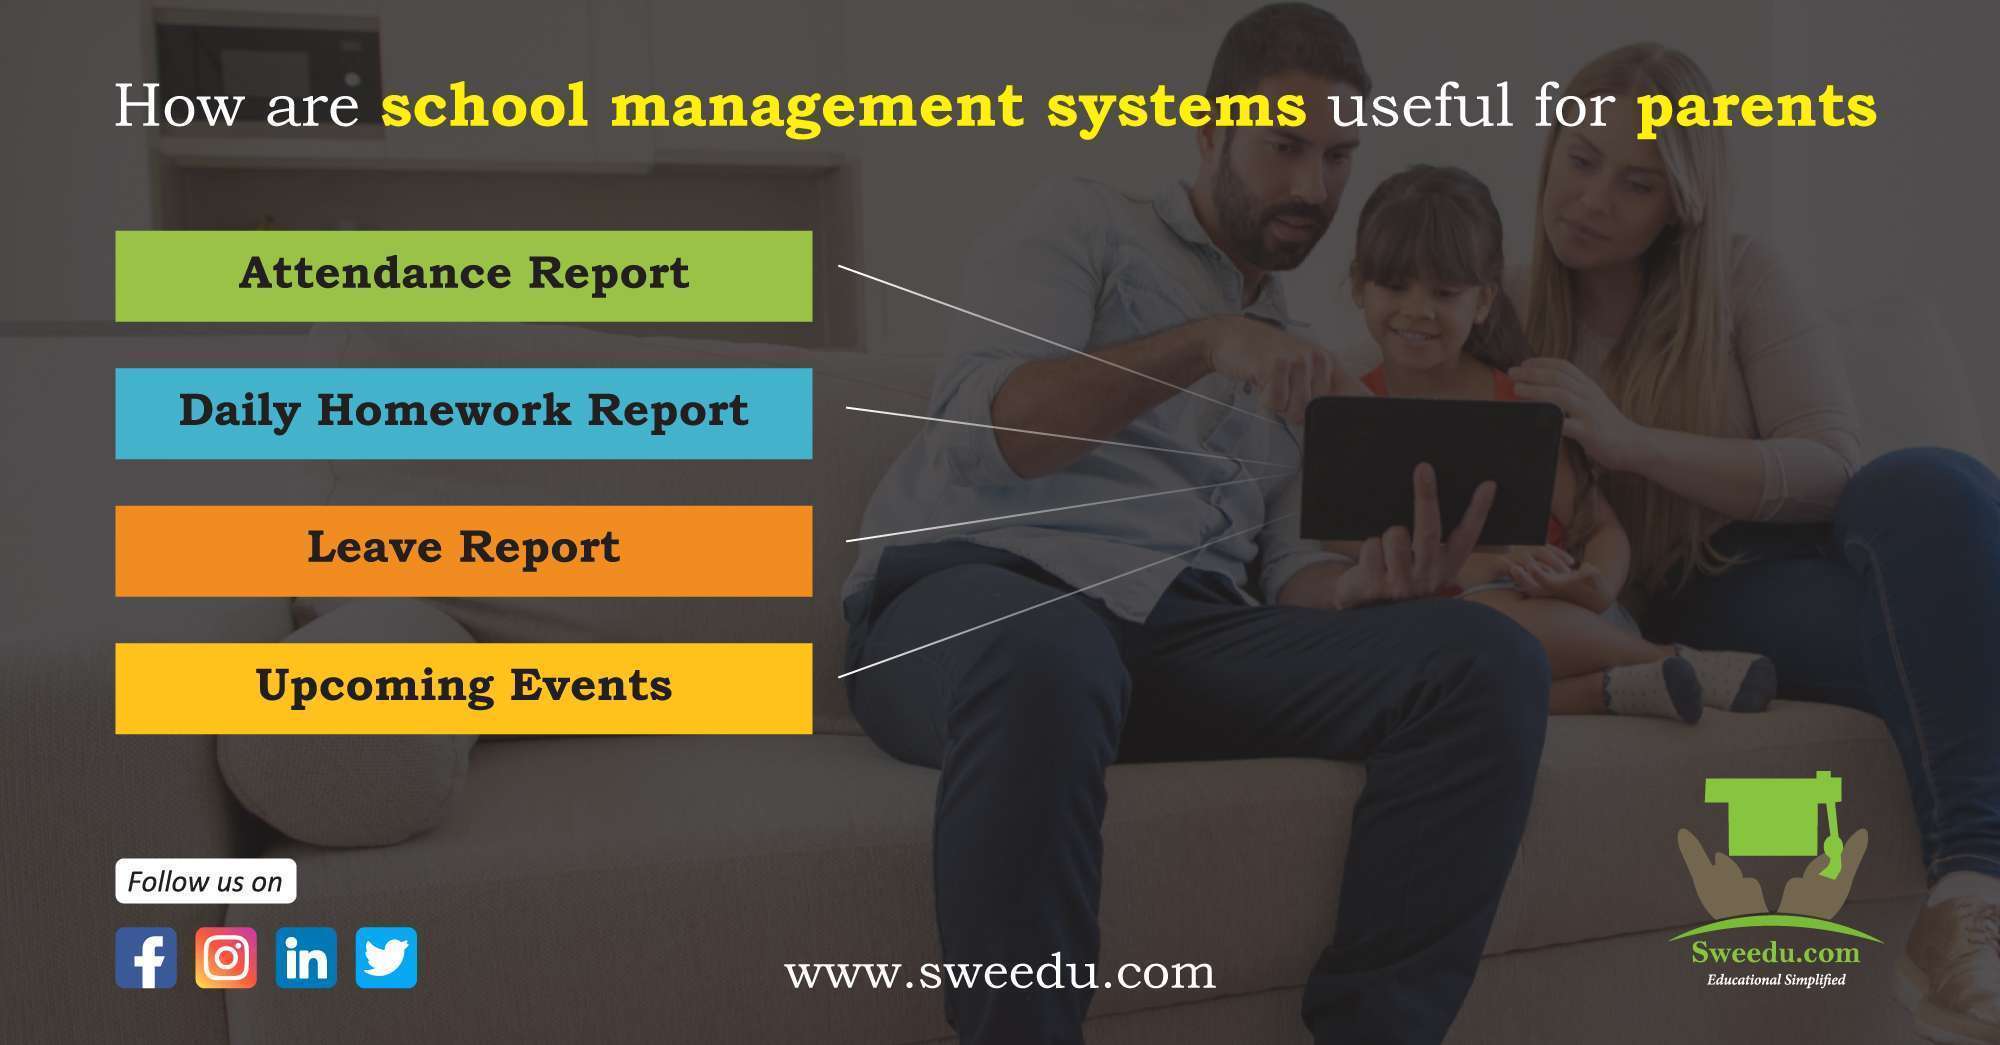 How are School Management Systems Useful for Parents?